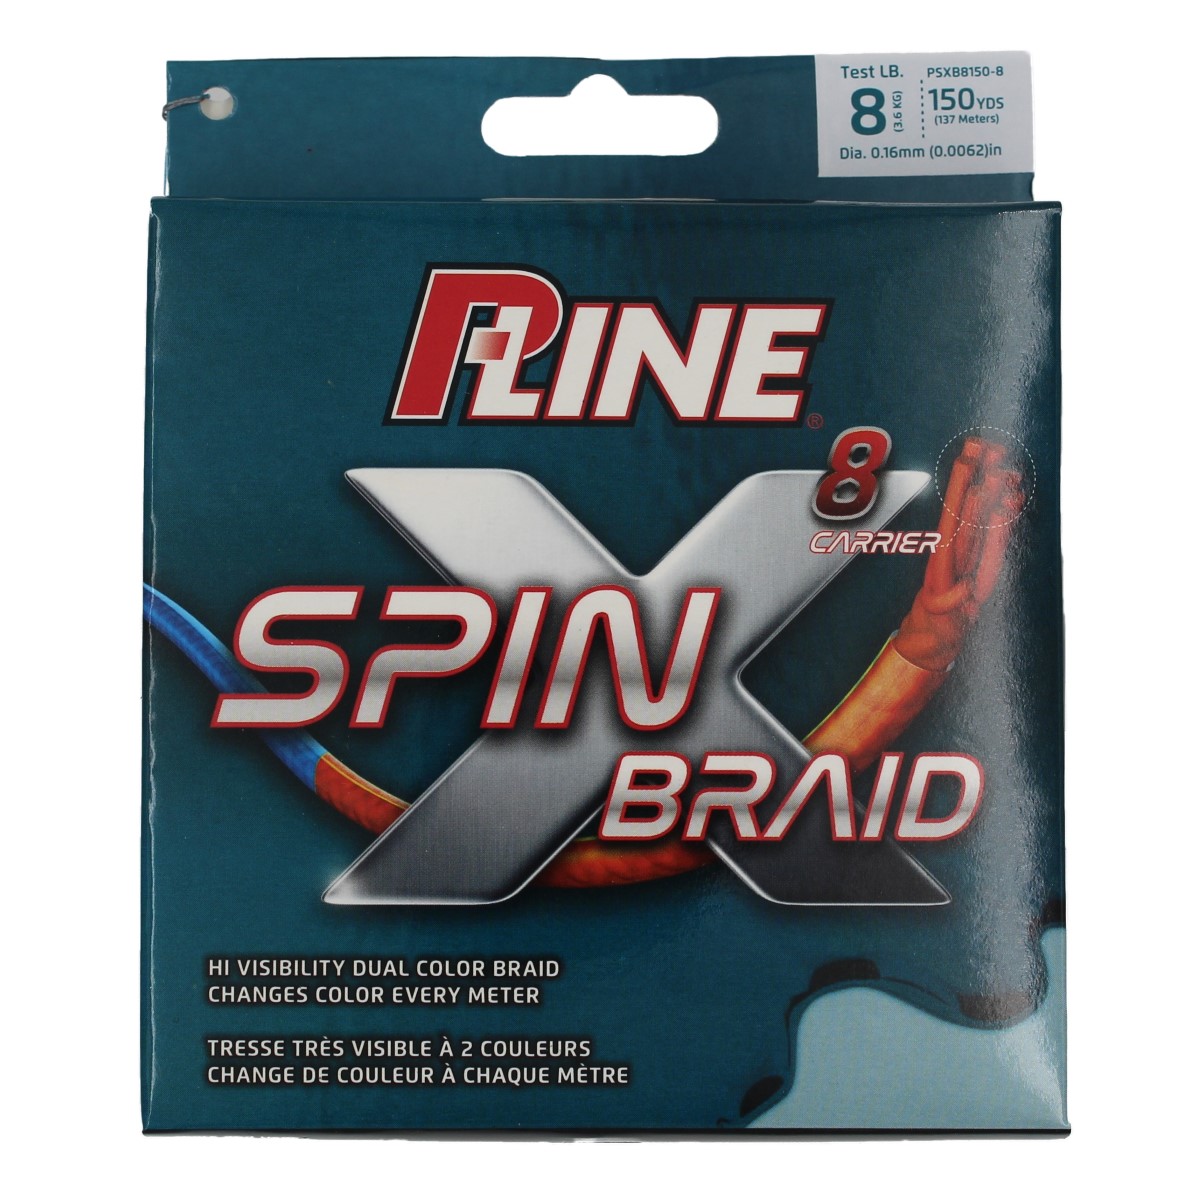 P-Line 8 Carrier Spin X Braid